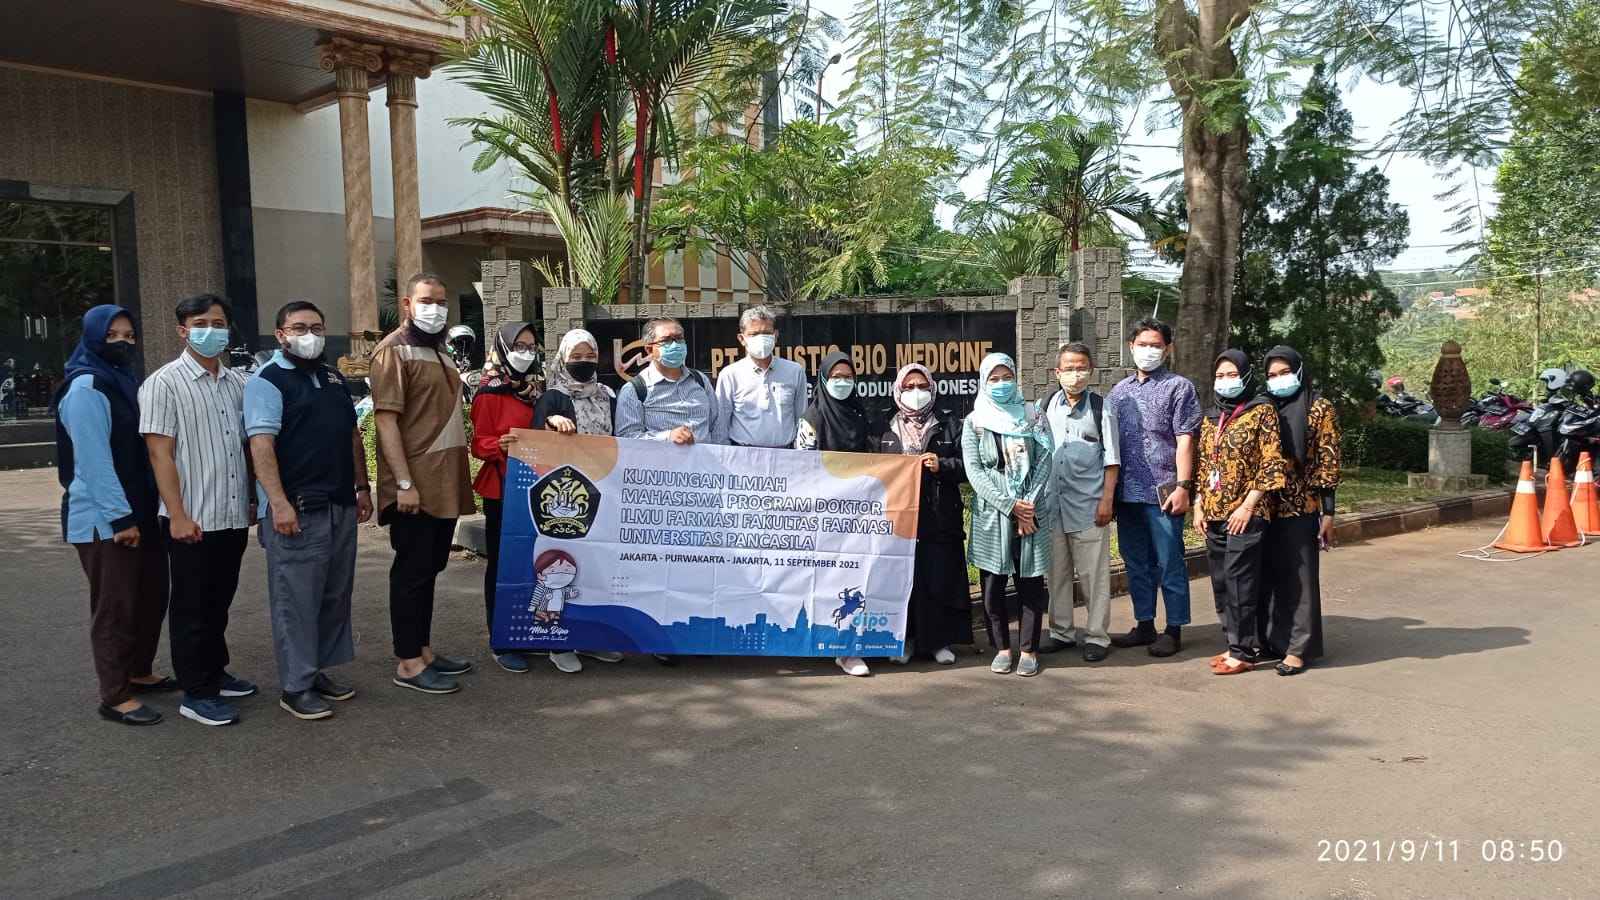 Scientific Visit of Students to the Hospital. Holistic Purwakarta